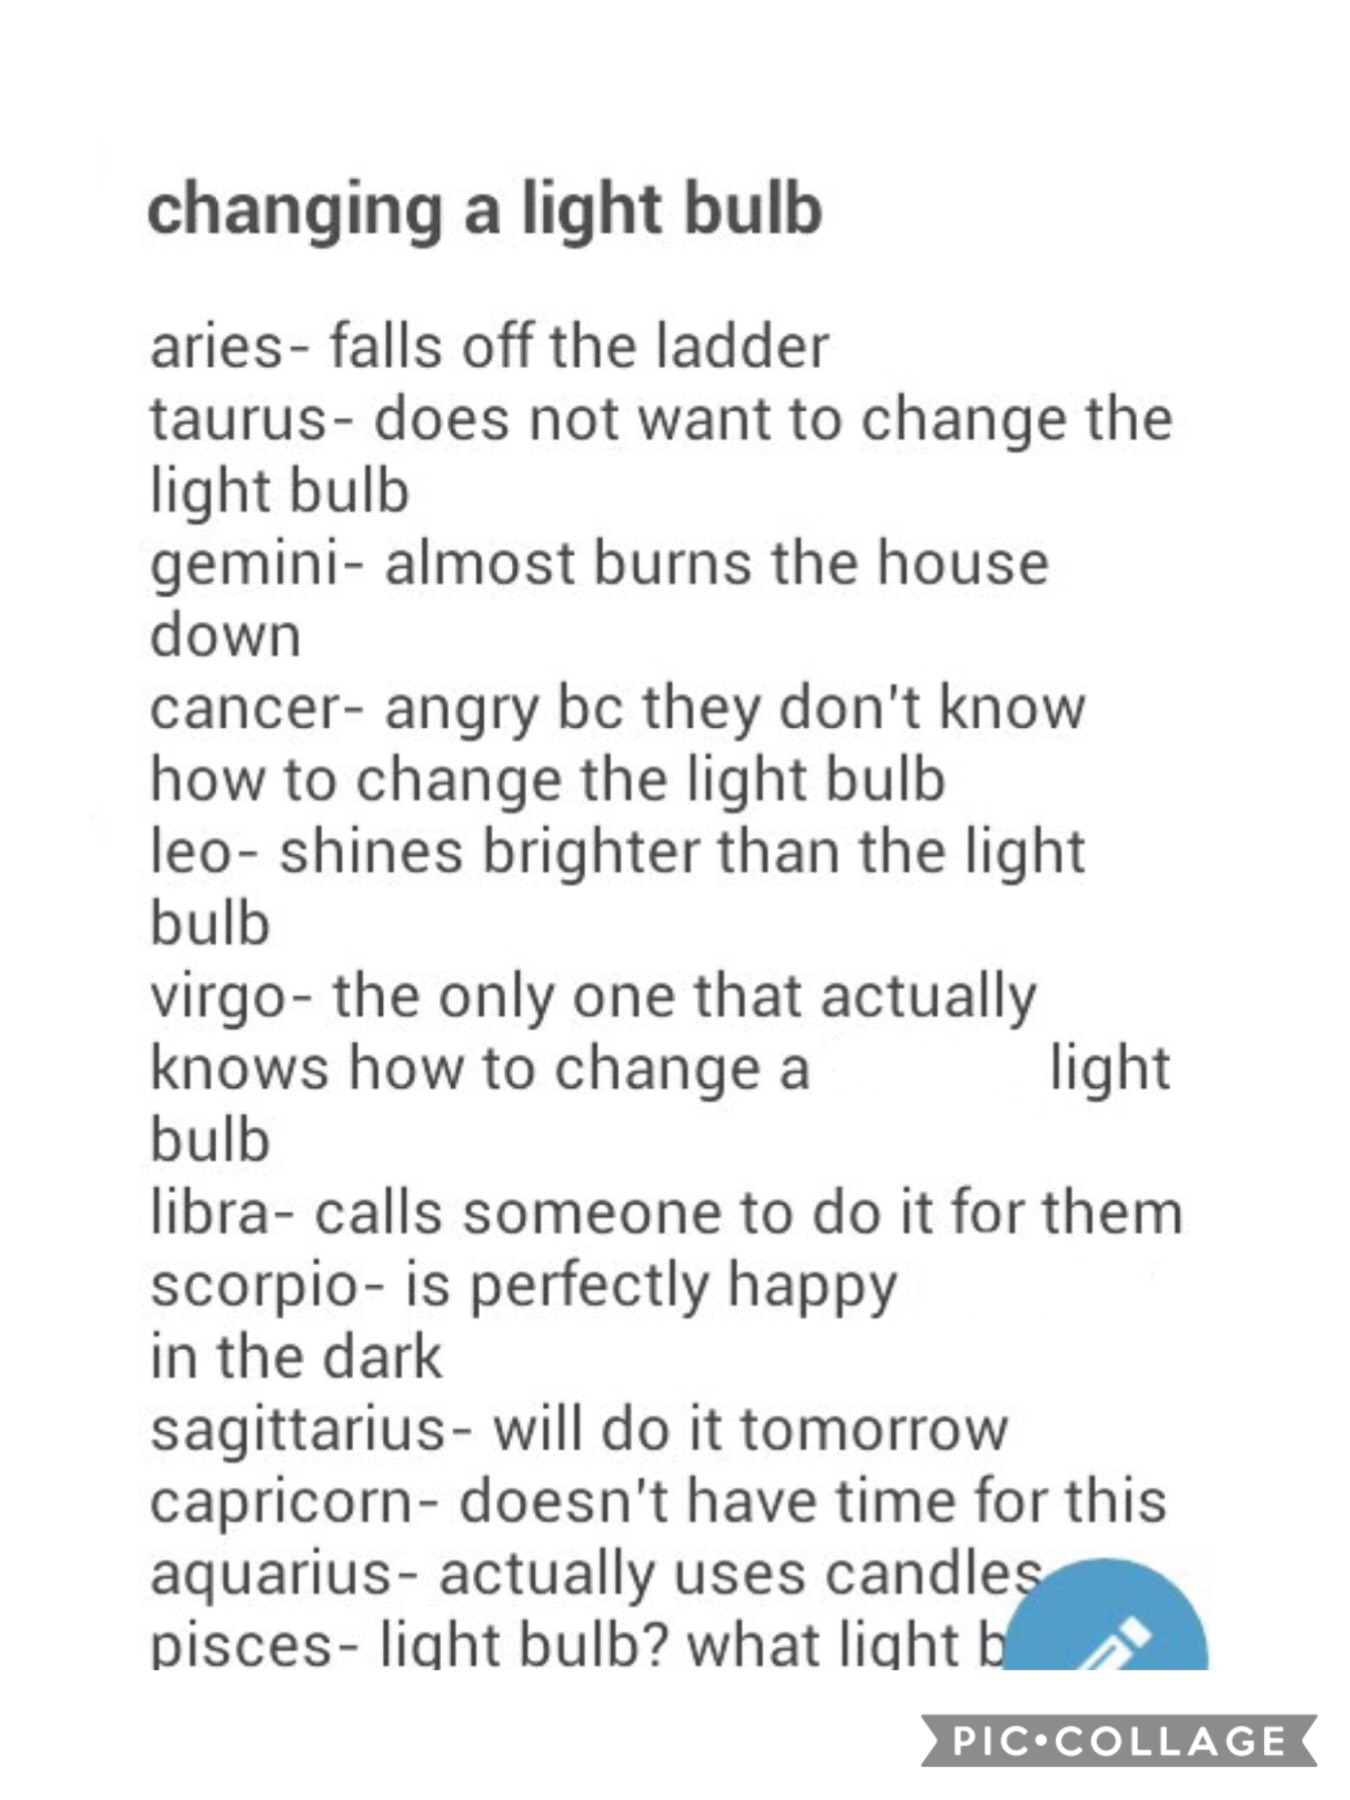 The signs changing a light bulb😂 Sorry about Scorpio